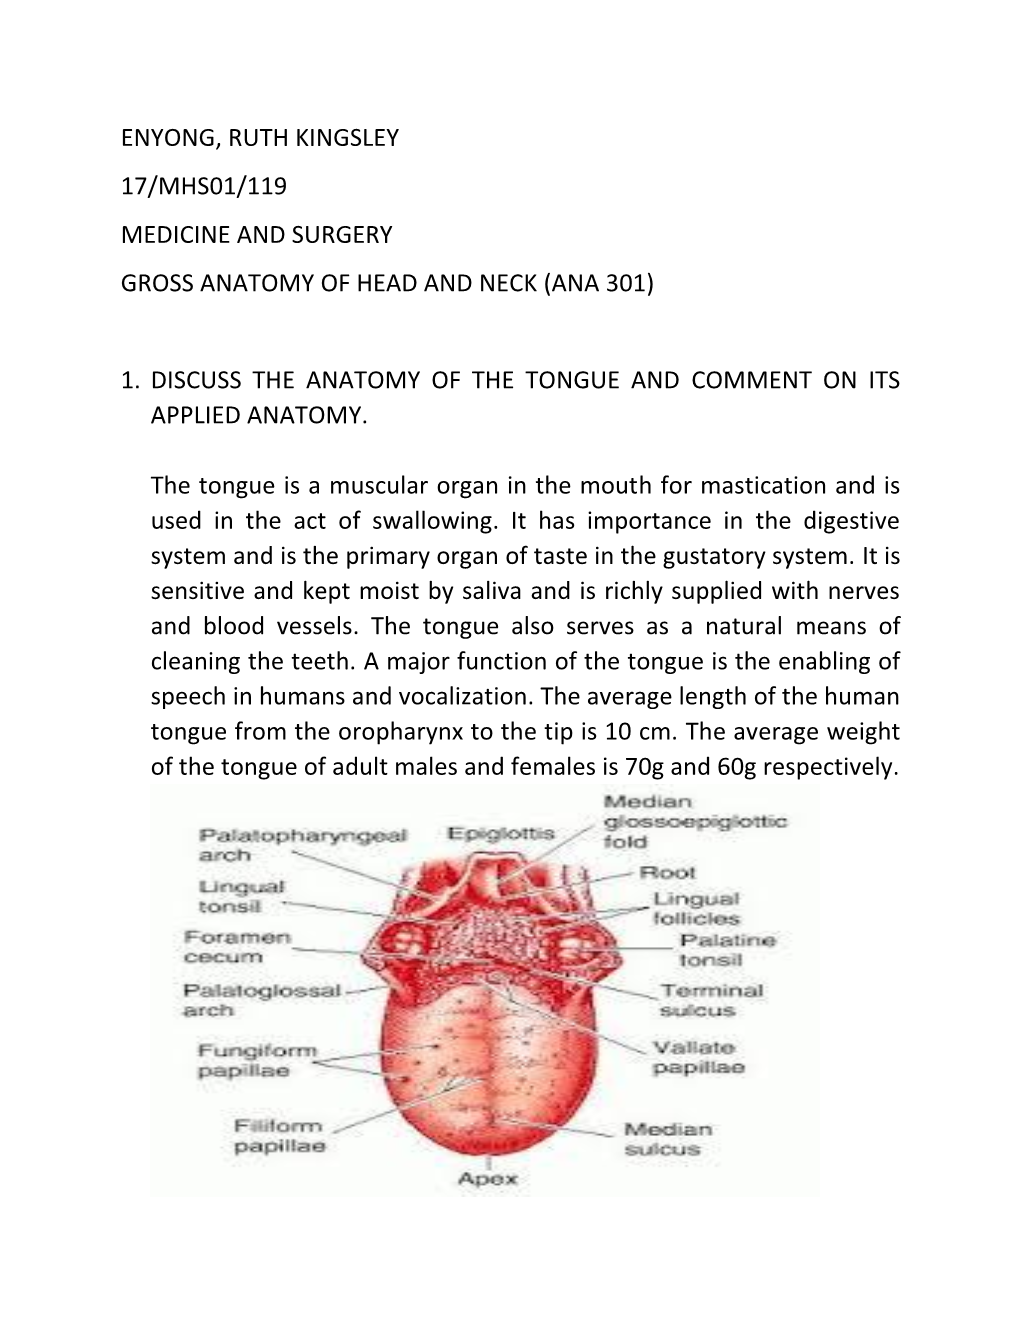 Enyong, Ruth Kingsley 17/Mhs01/119 Medicine and Surgery Gross Anatomy of Head and Neck (Ana 301)